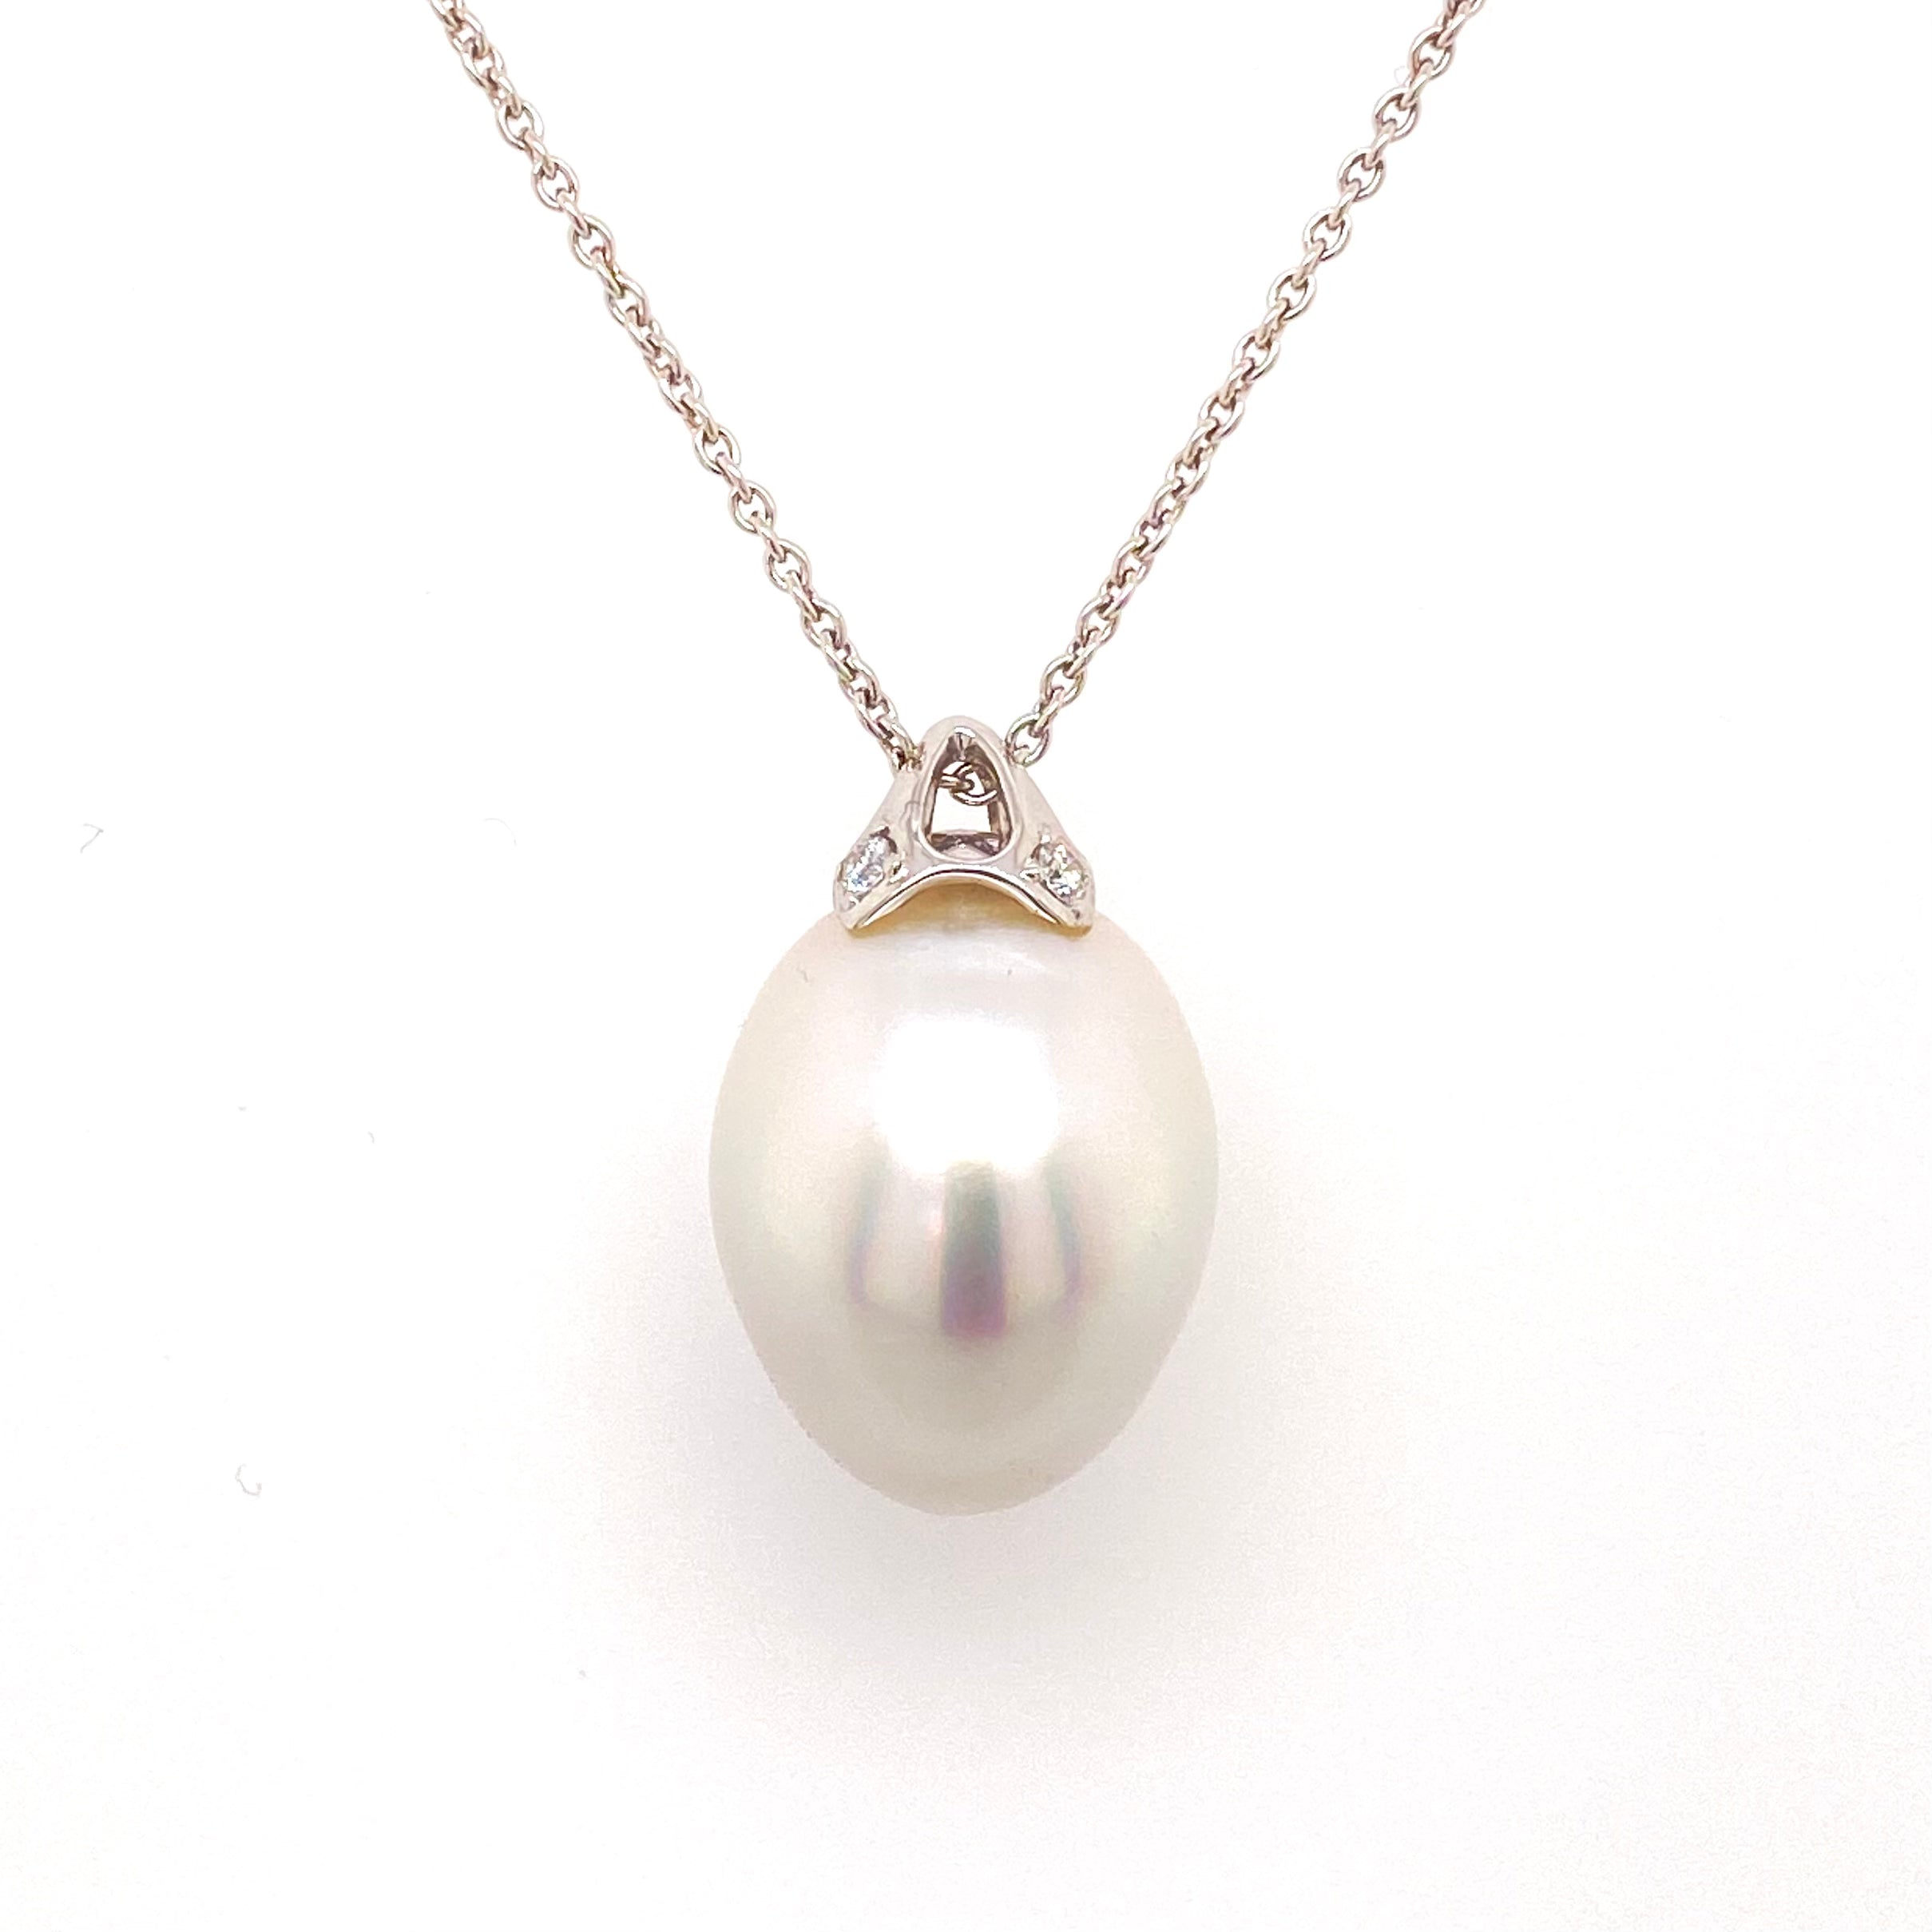 South Sea pearl pendant and chain